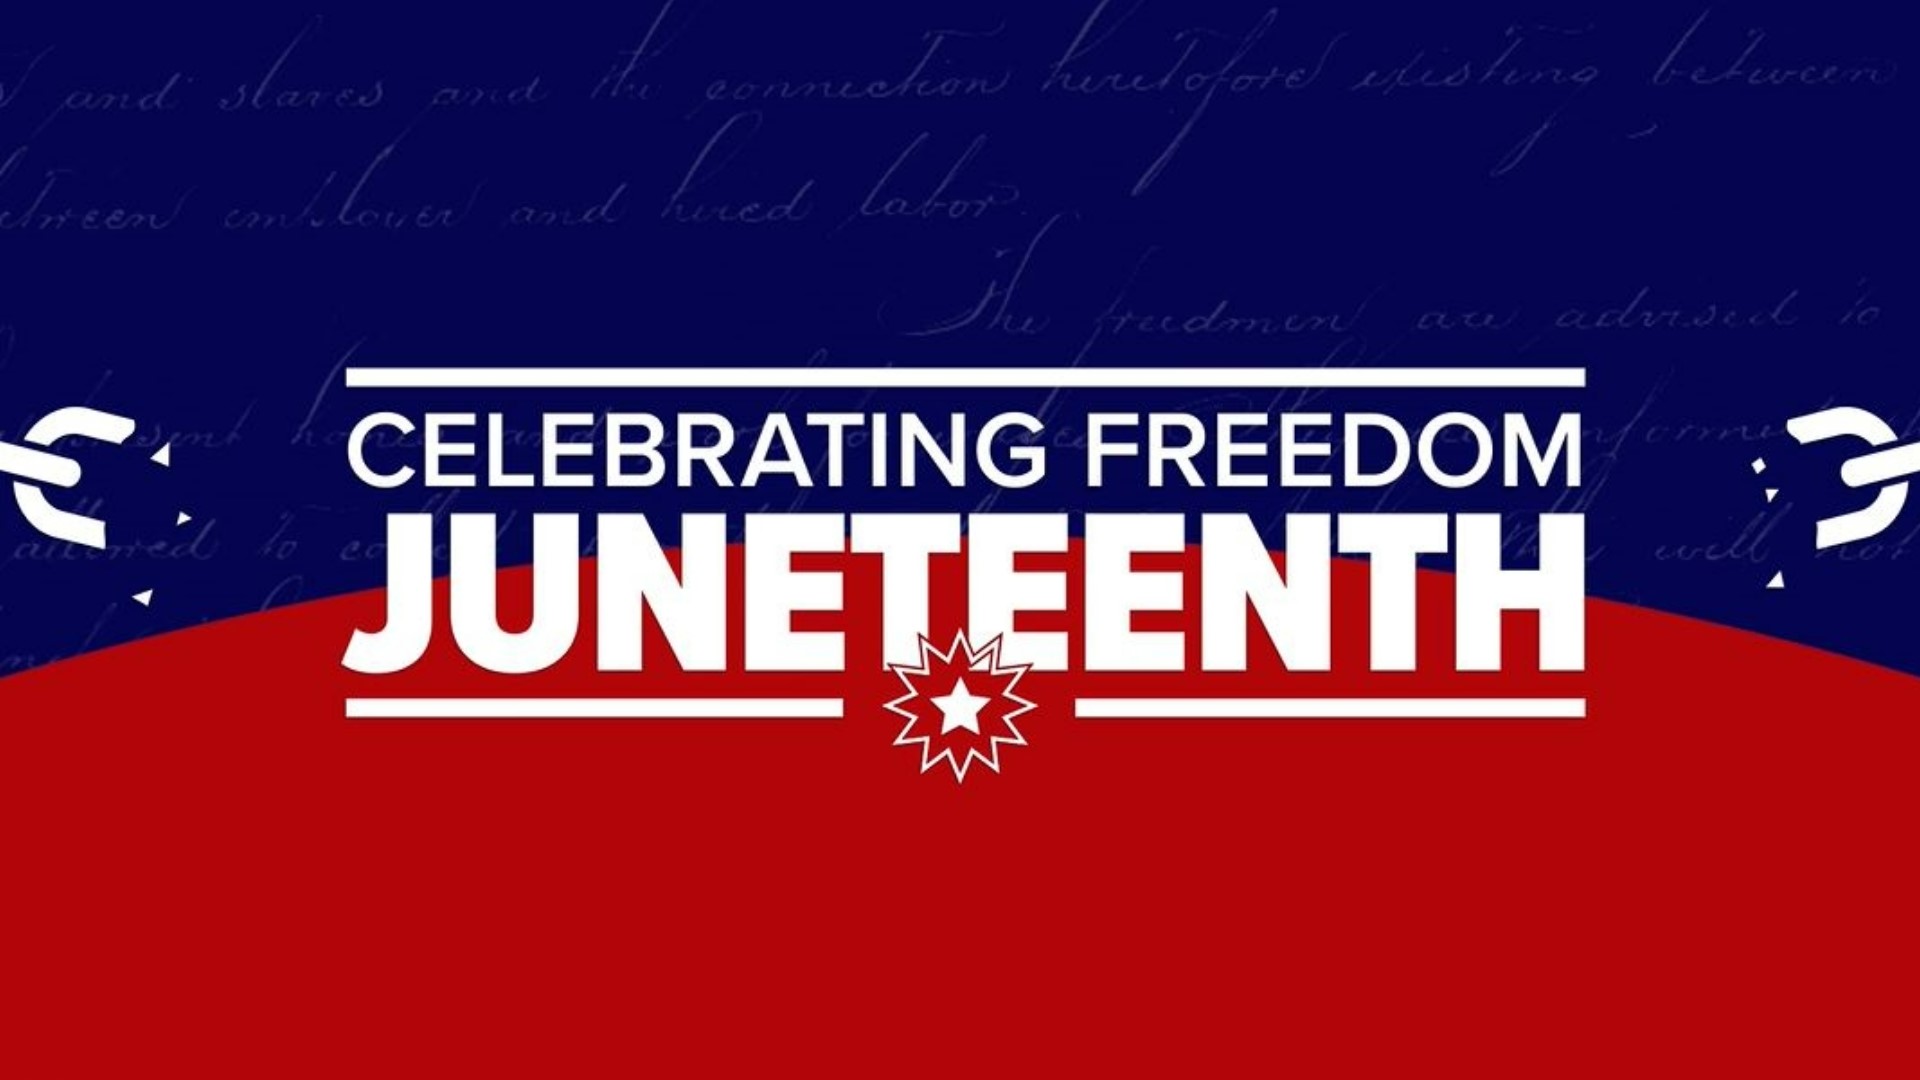 A look at the history and origin of the federal holiday Juneteenth, as well as discussing Black pride and how to mark the holiday.